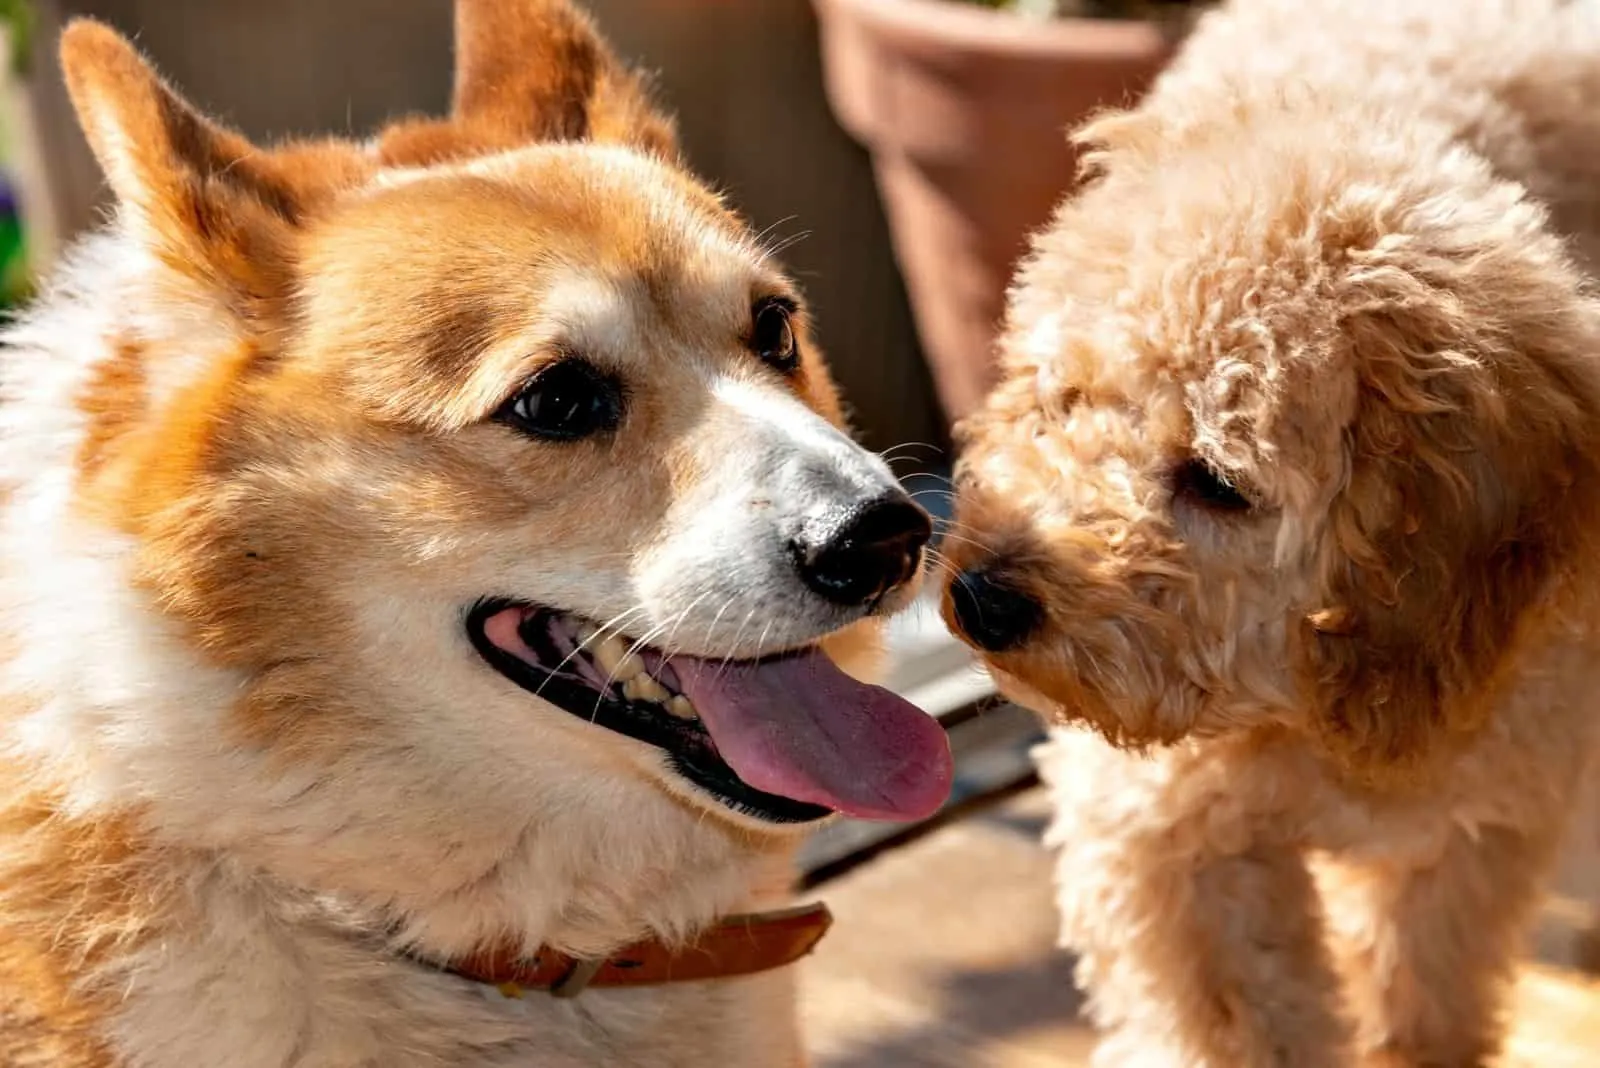 corgi and poodle meeting for the first time